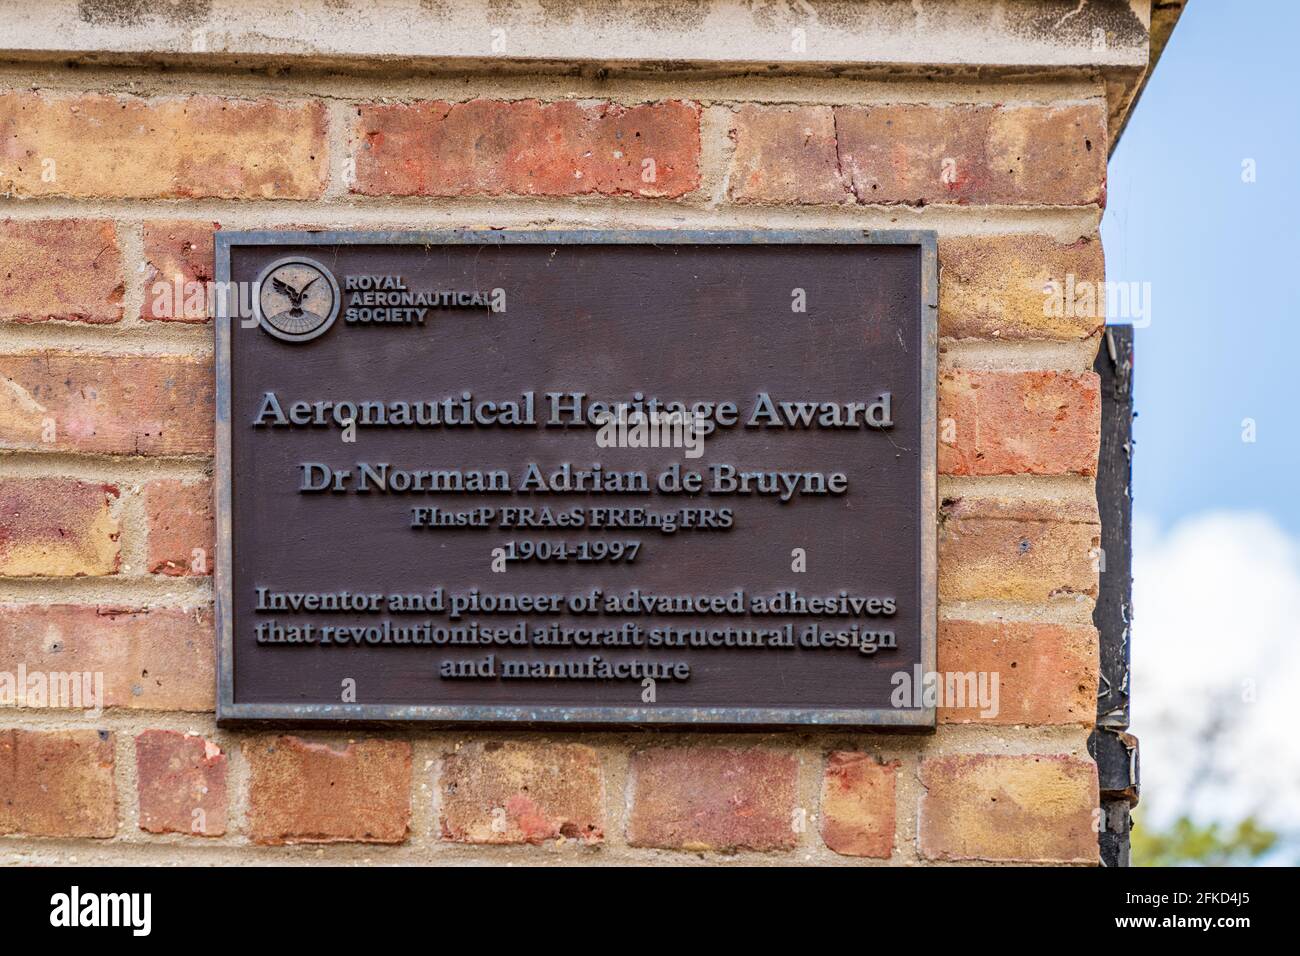 Aeronautical Heritage Award for Dr Norman Adrian de Bruyne Cambridge  - Pioneer in the use of structural adhesive bonding in aircraft production. Stock Photo